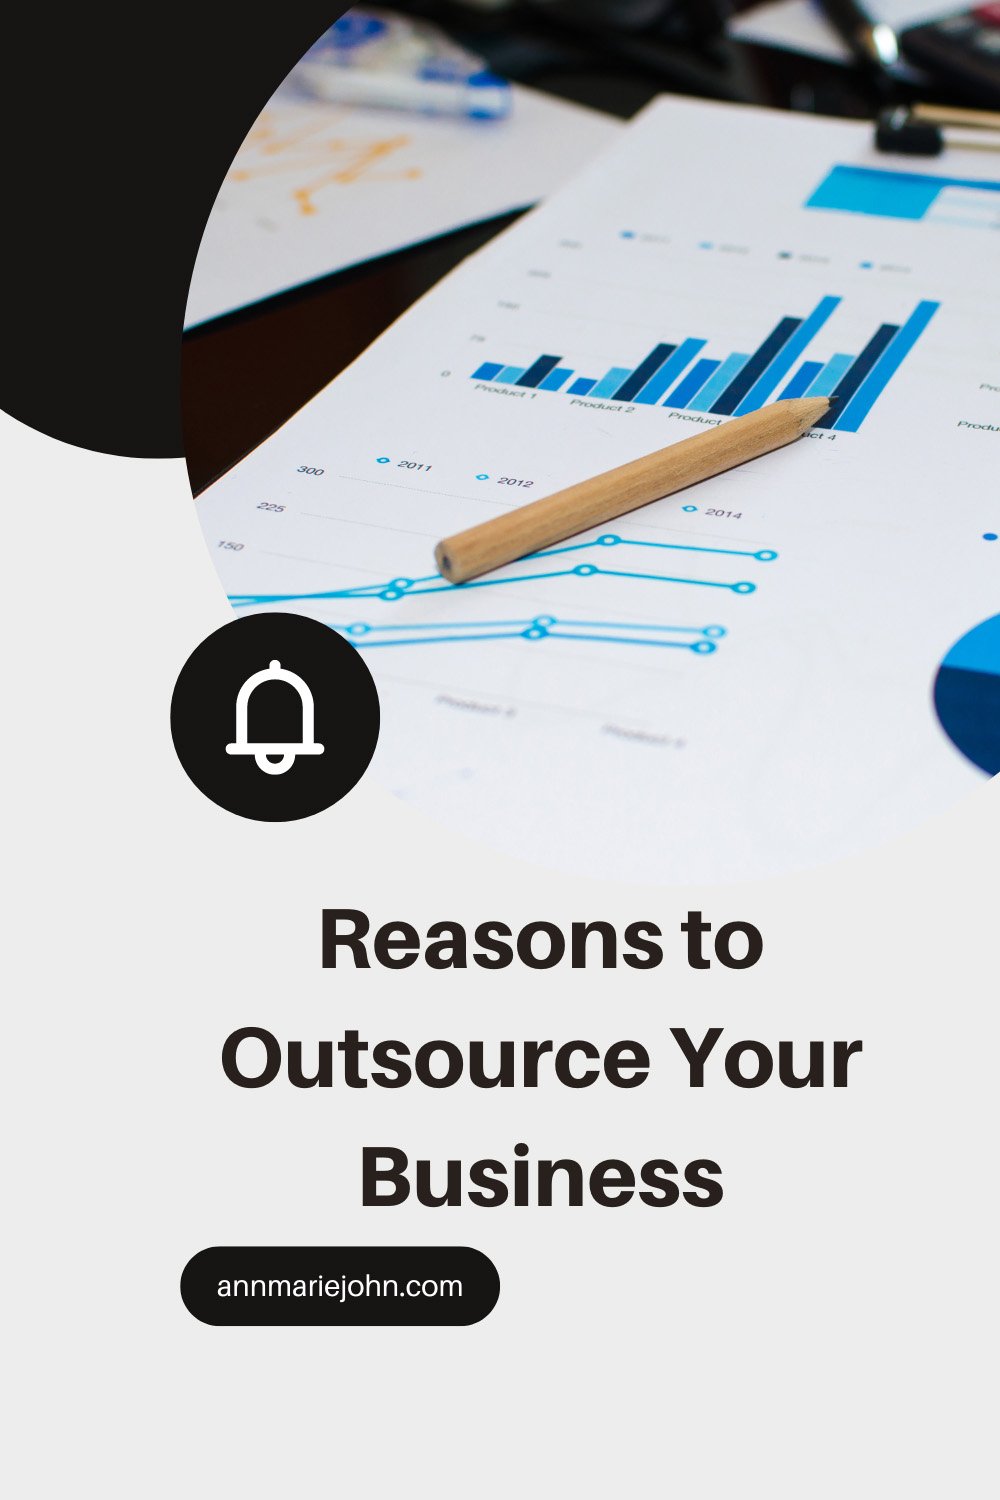 Reasons to Outsource Your Business